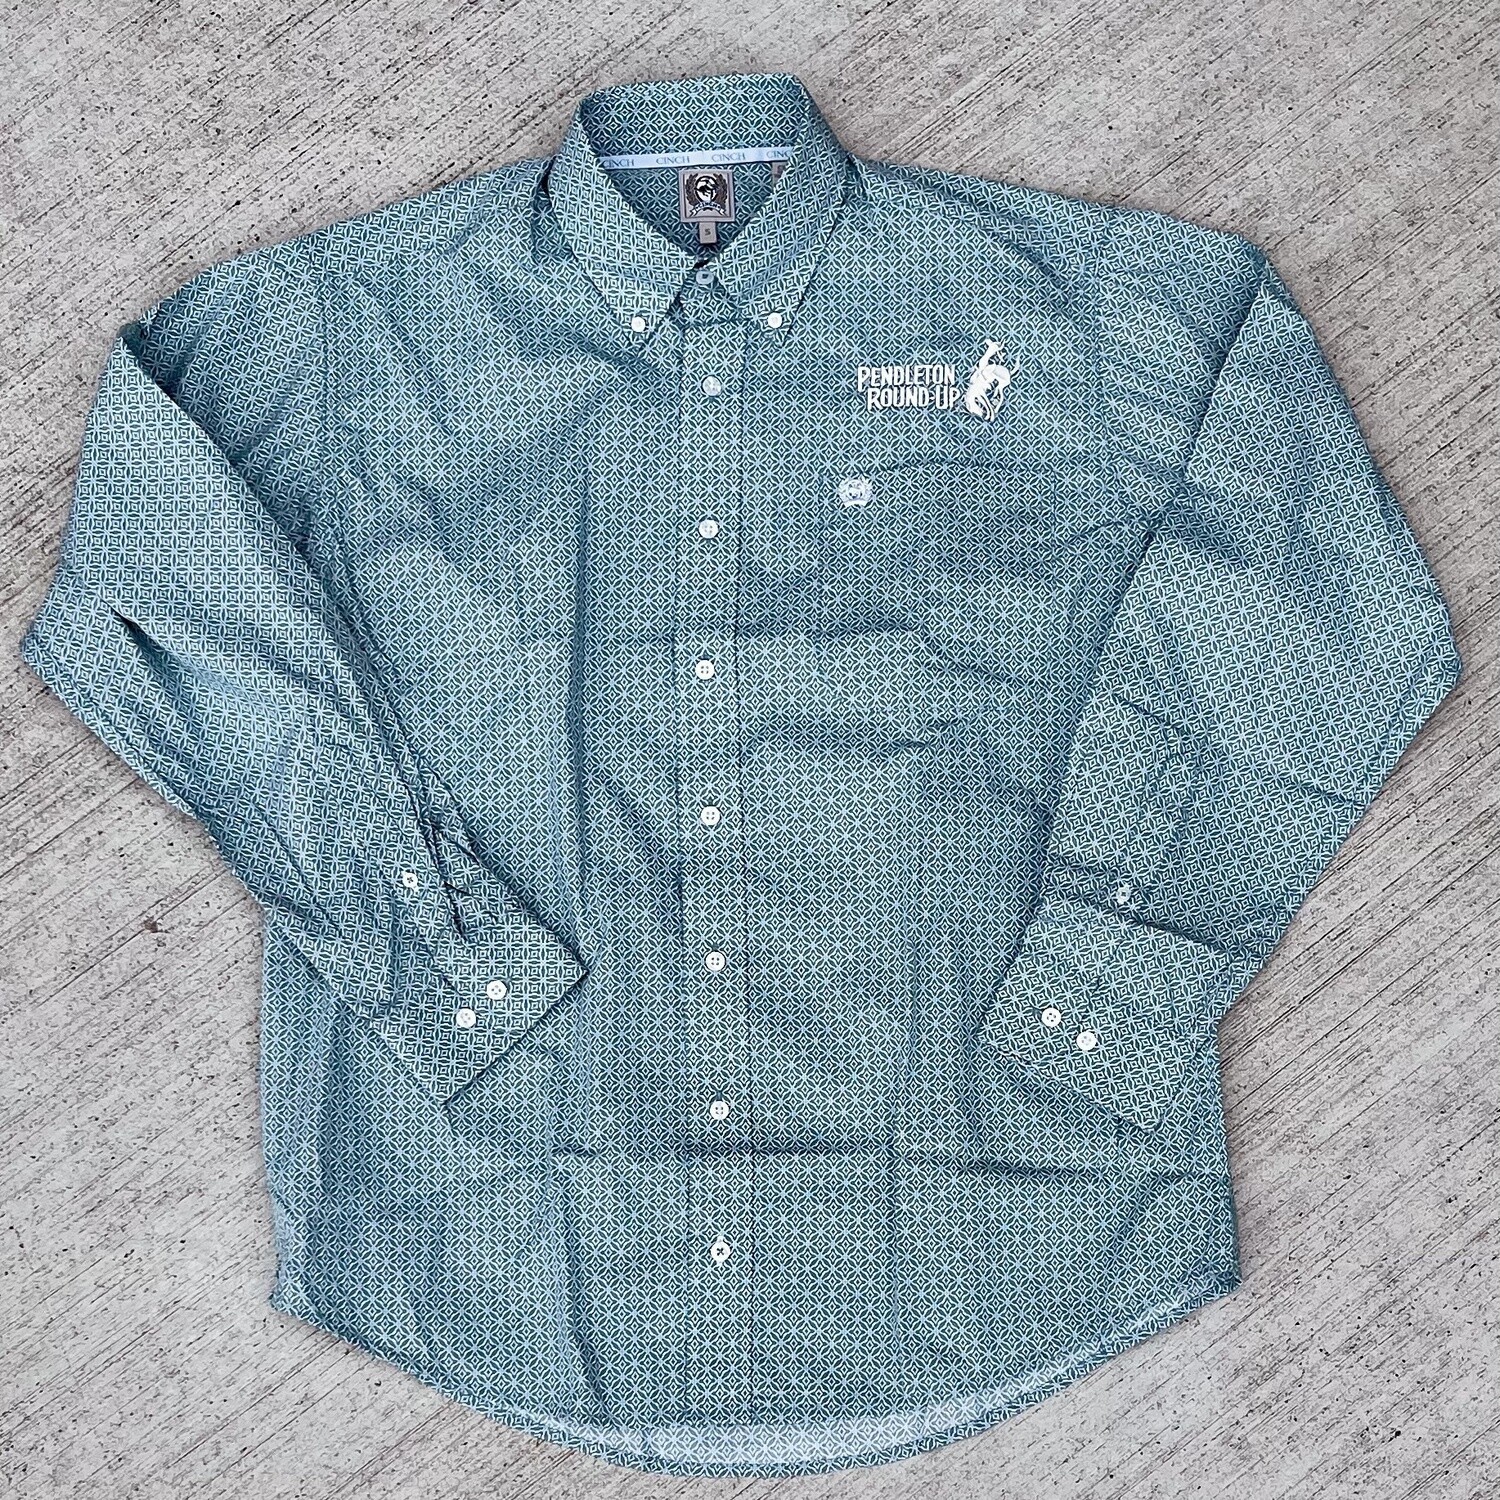 Men&#39;s Cinch Pendleton Round-Up Teal Diamond Long Sleeve Button Up, size: S